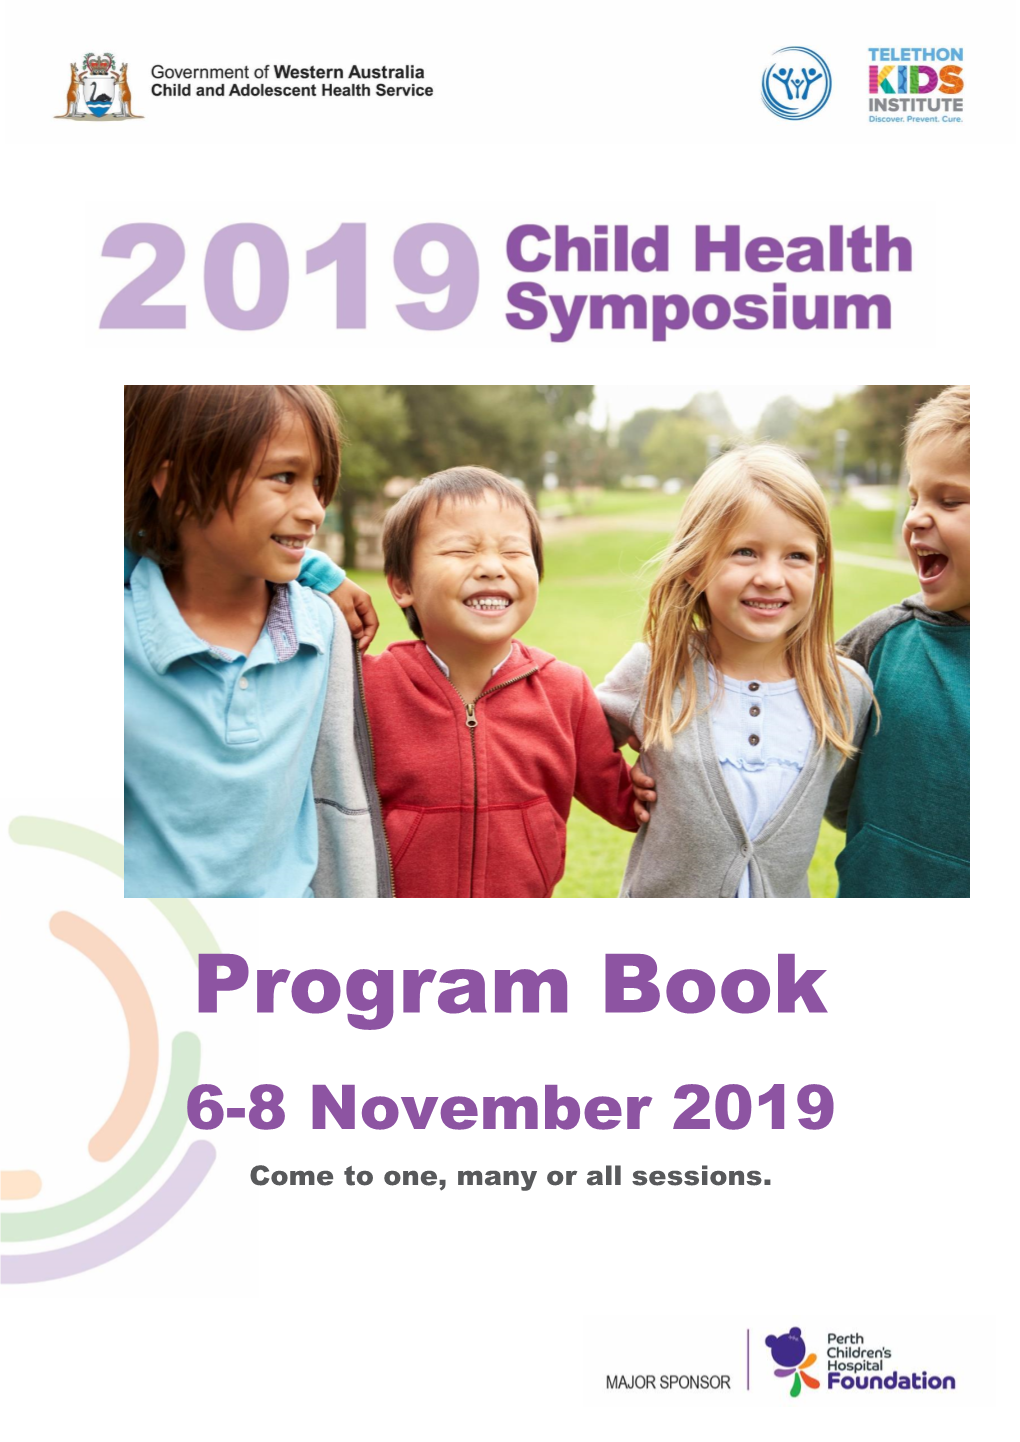 Program Book 6-8 November 2019 Come to One, Many Or All Sessions